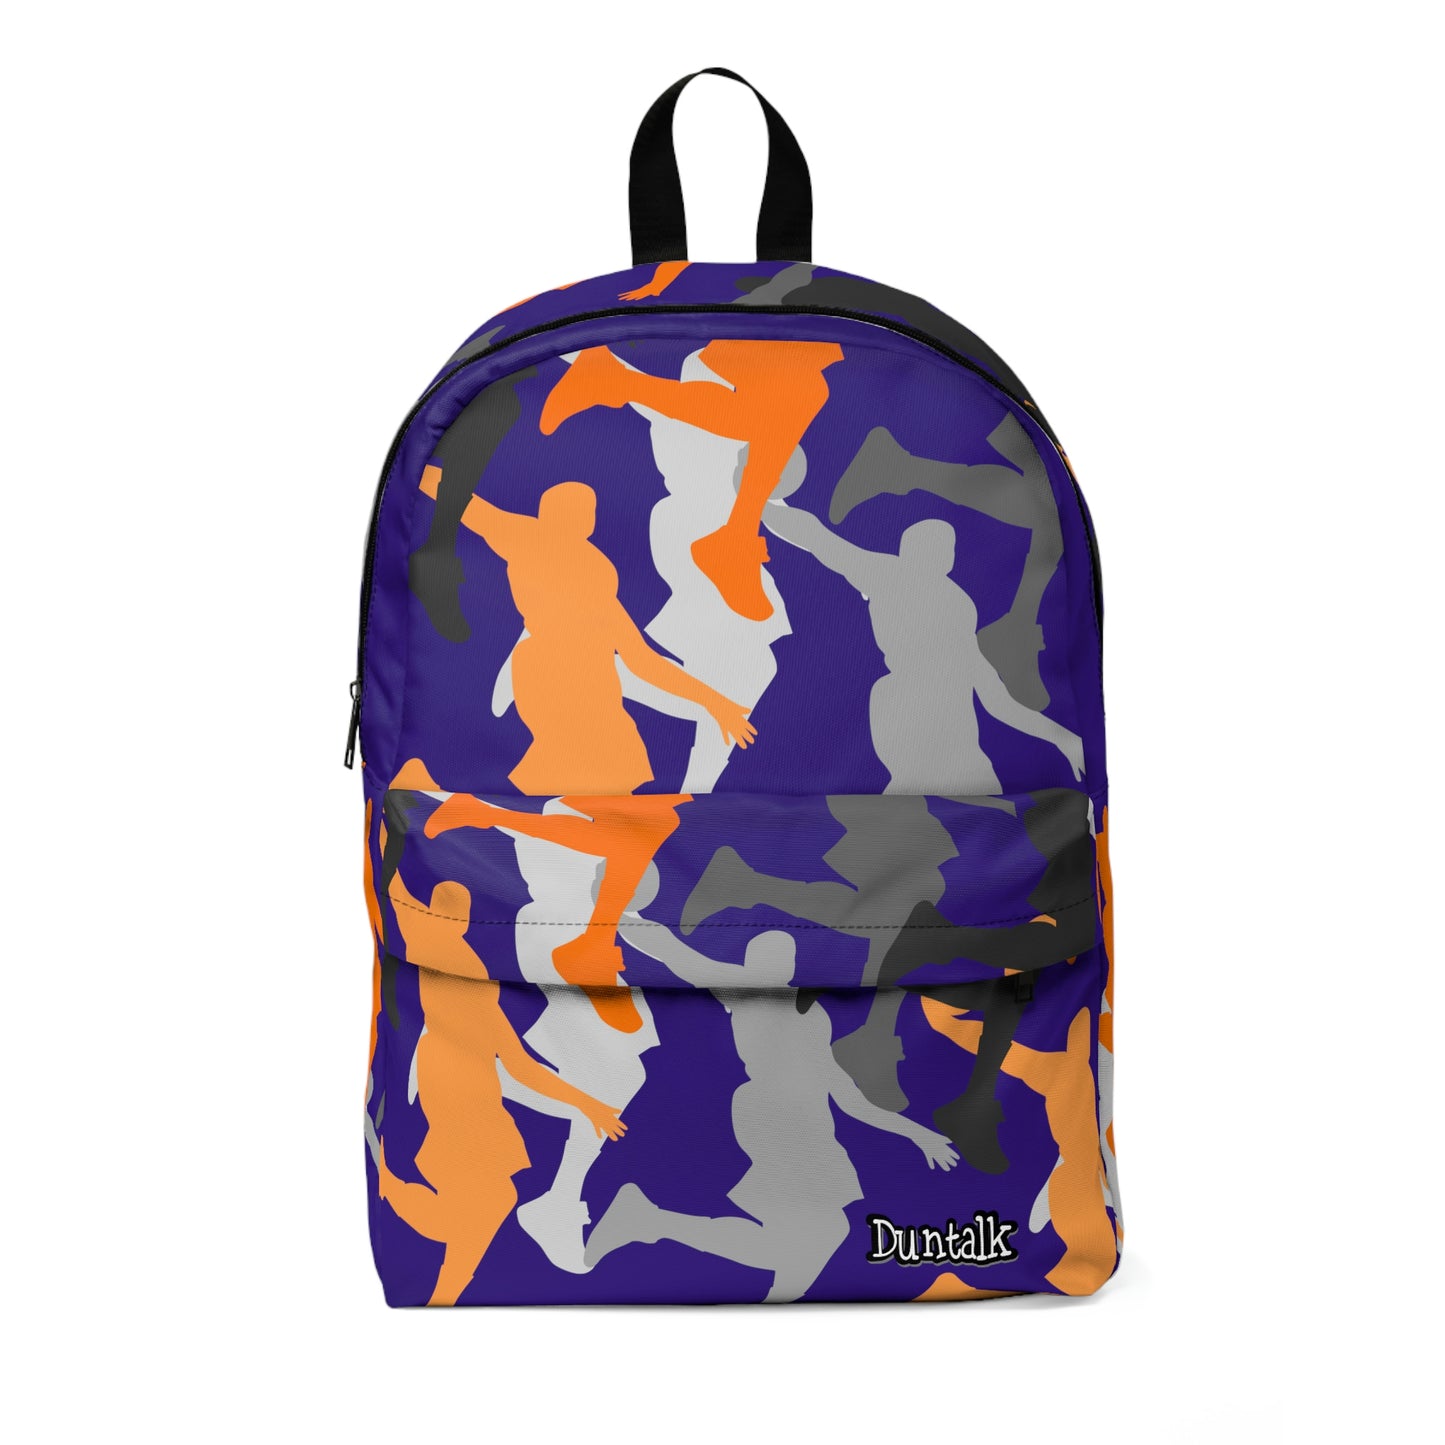 Purple backpack with yellow, grey and black dunking silhouettes printed all over. Small zipper pocket located on the front with "Duntalk" written in yellow on the bottom corner.